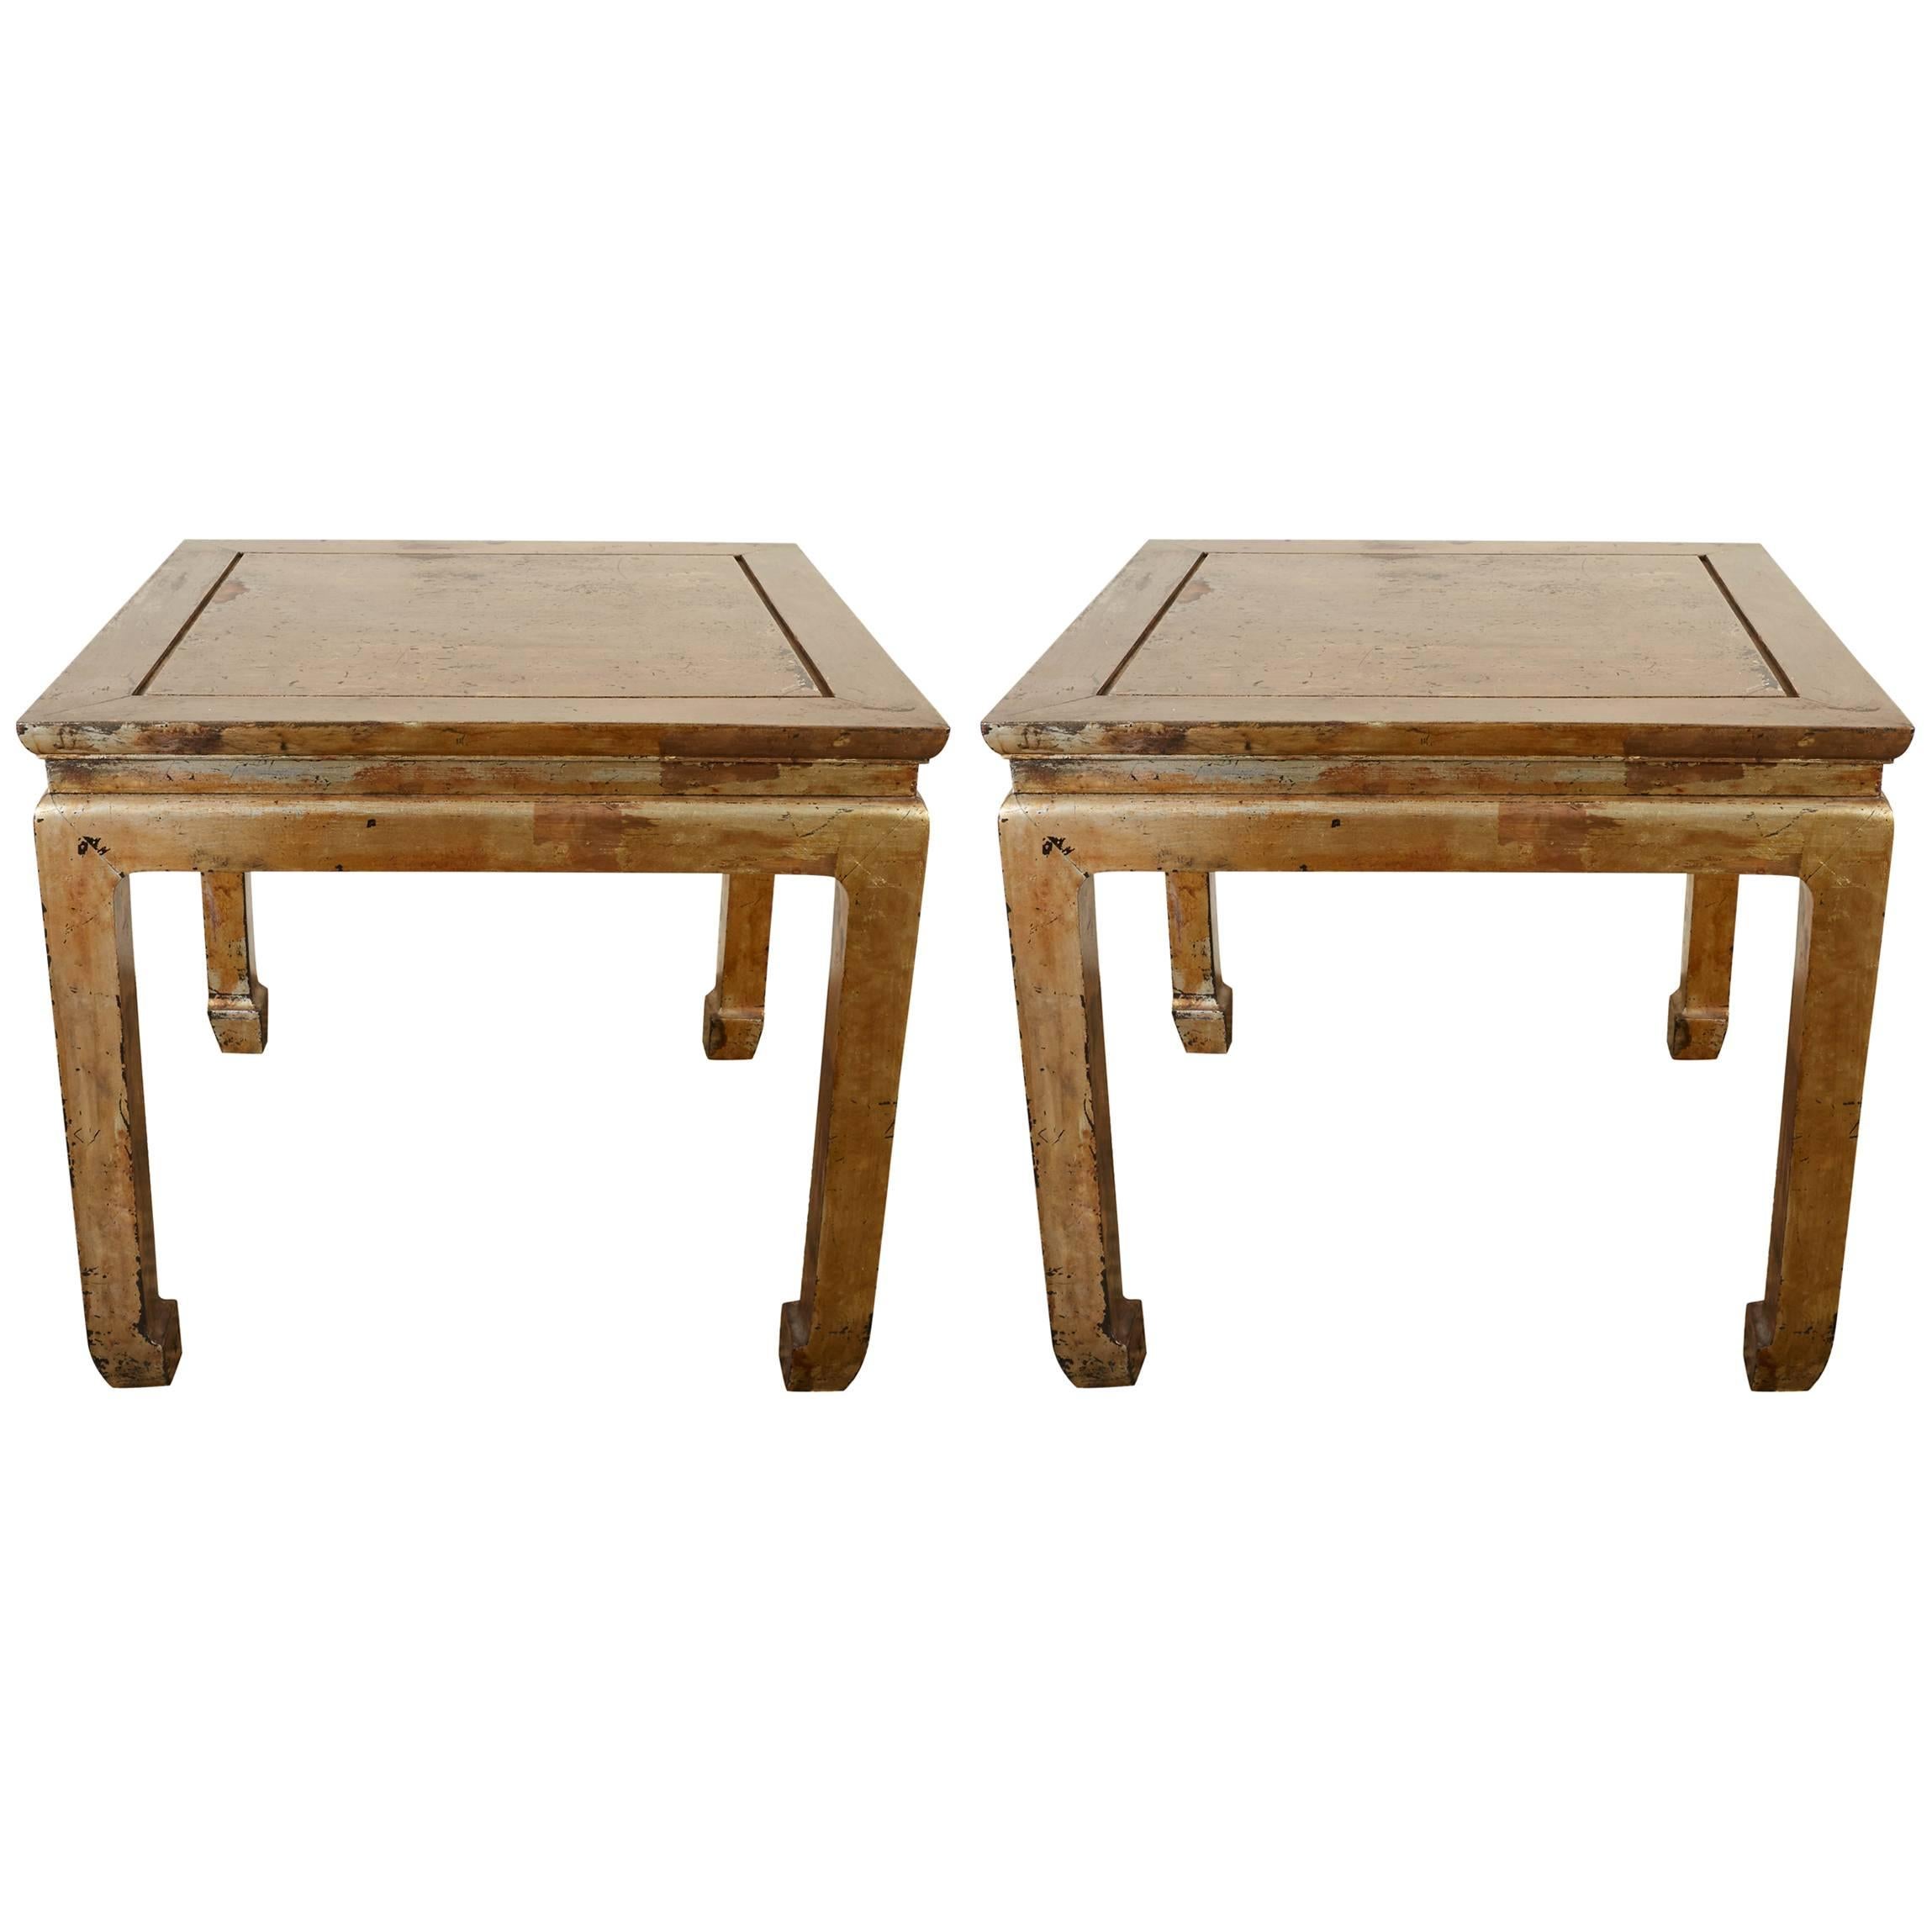 Pair of Silver-Gilt Chinioserie Square Low Tables